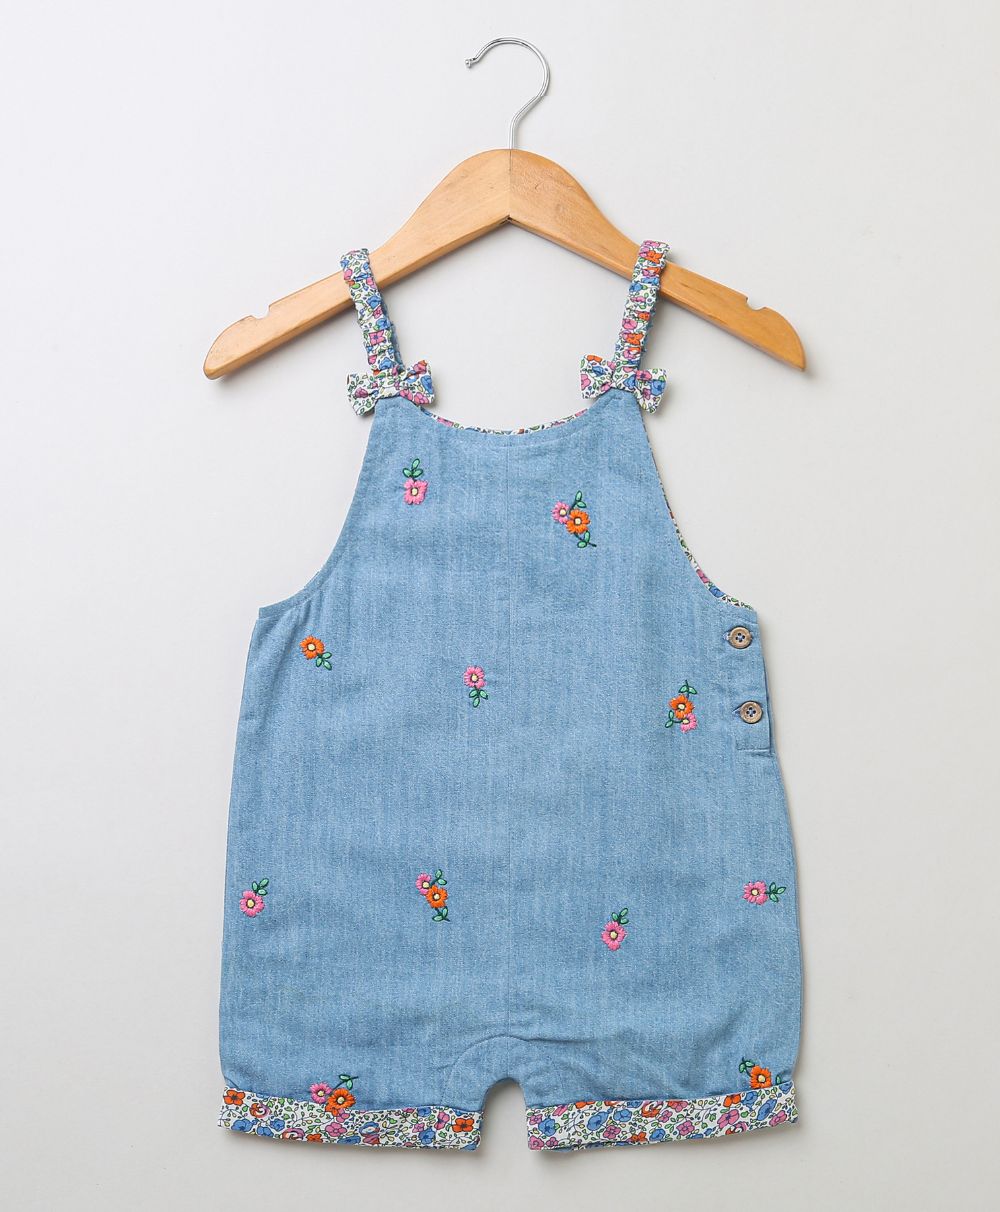 All-over Floral Embroidery Denim Dungaree